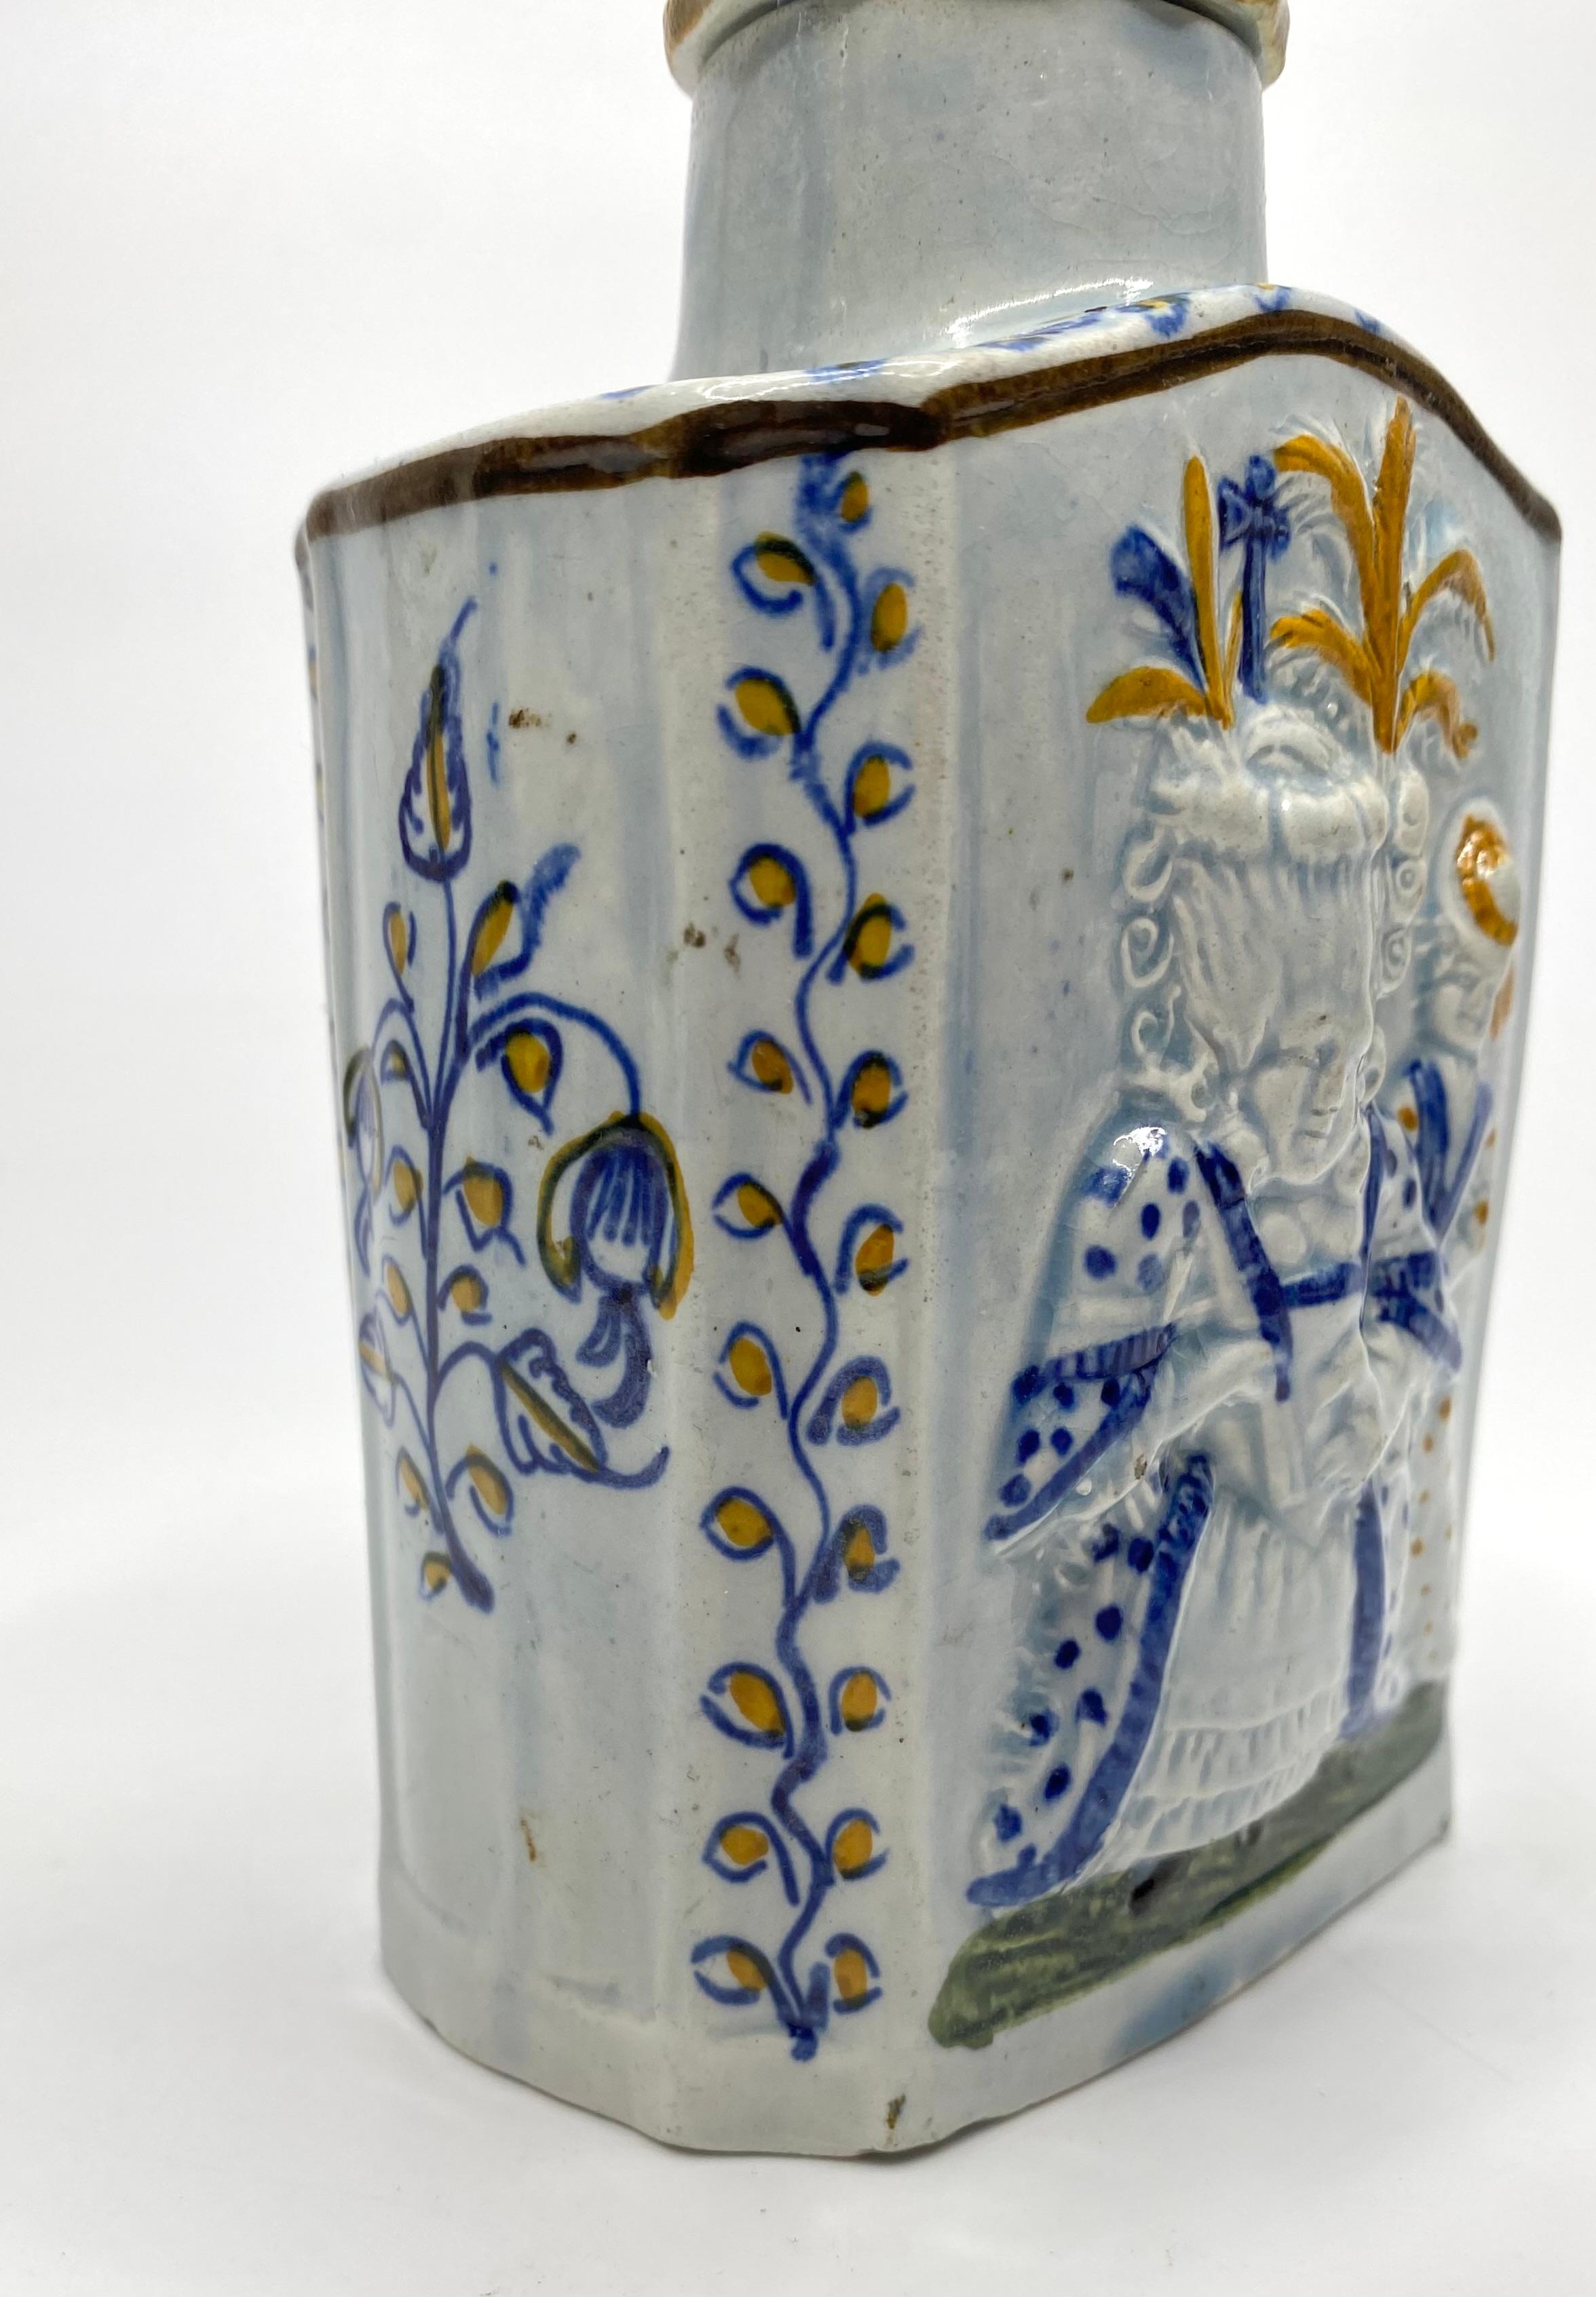 Pottery Prattware pottery ‘Macaroni’ tea caddy and cover, c. 1800.